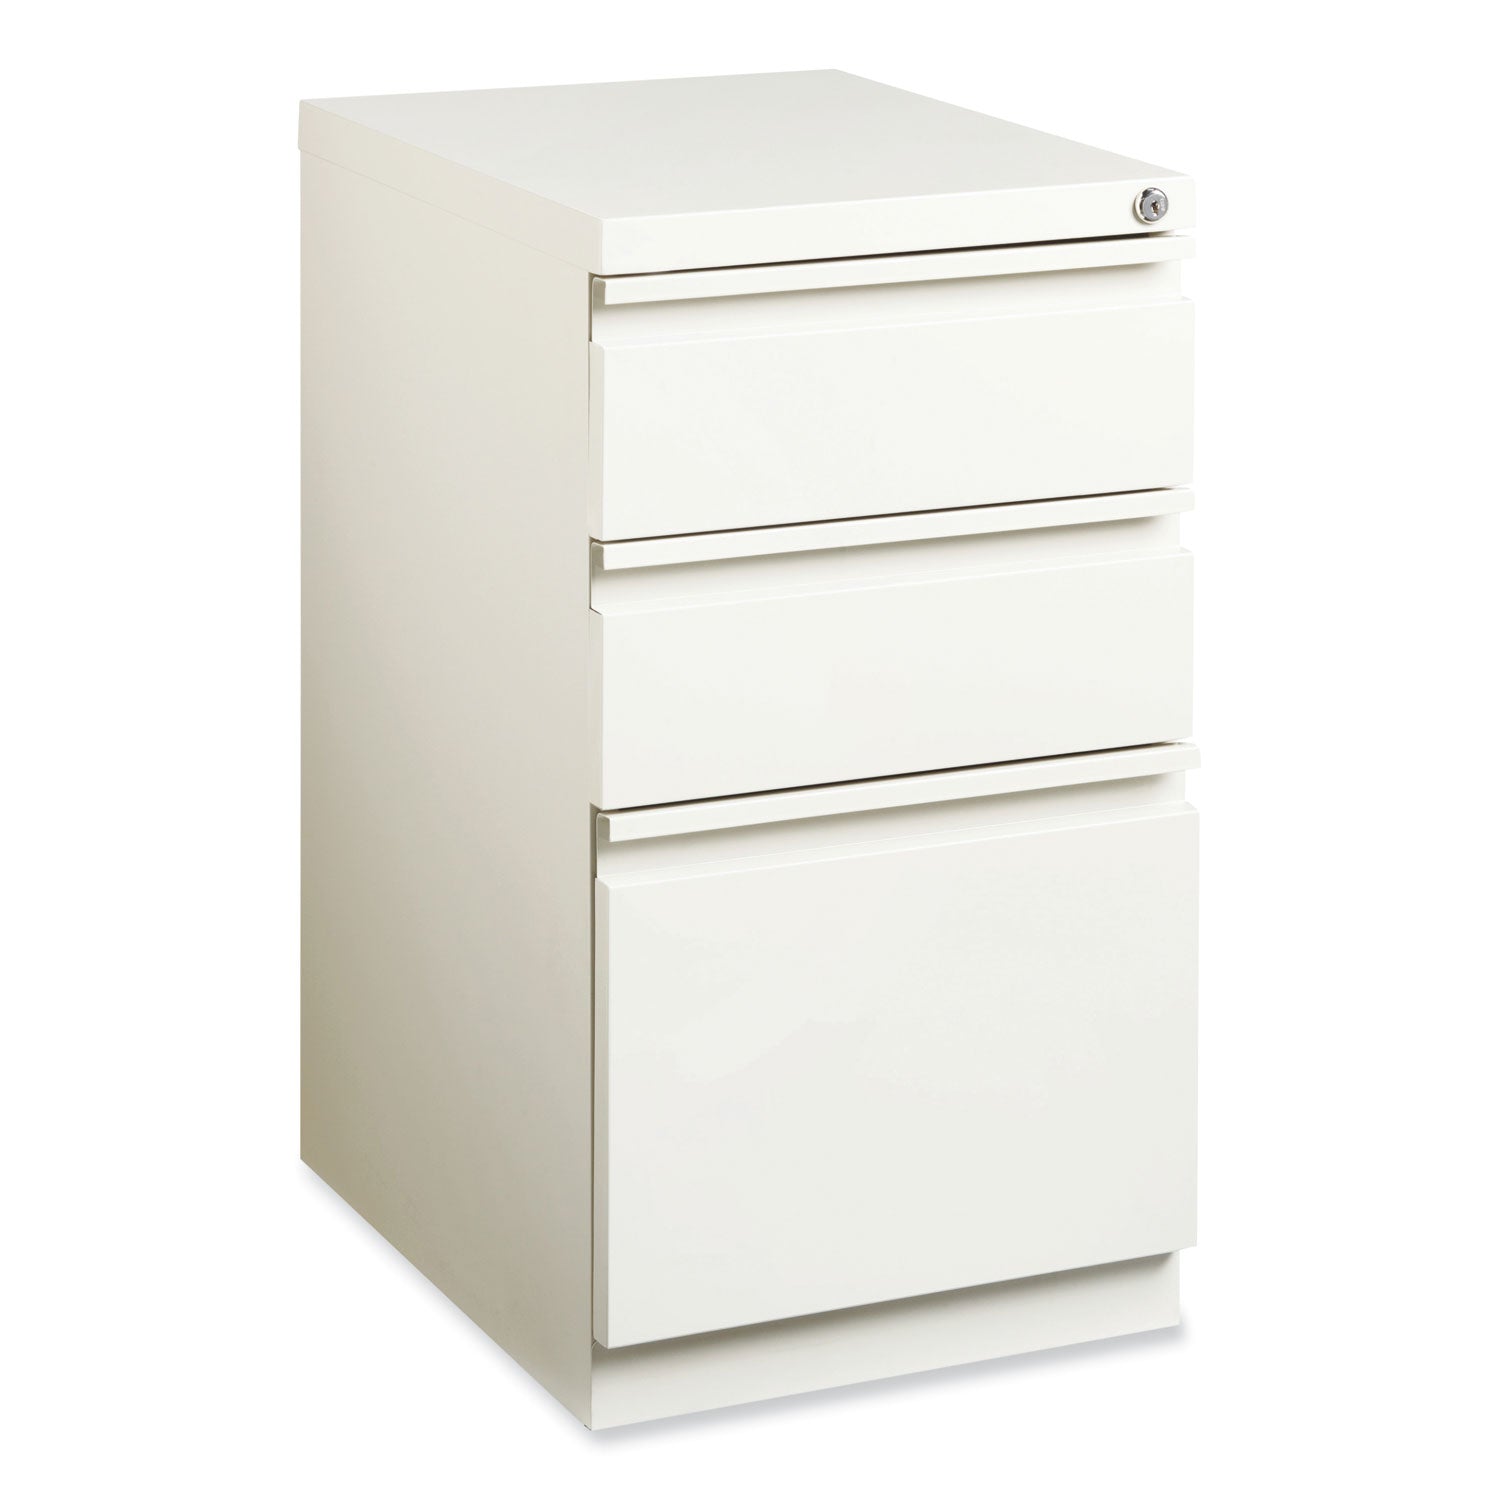 full-width-pull-20-deep-mobile-pedestal-file-box-box-file-letter-white-15-x-1988-x-2775-ships-in-4-6-business-days_hid19353 - 1